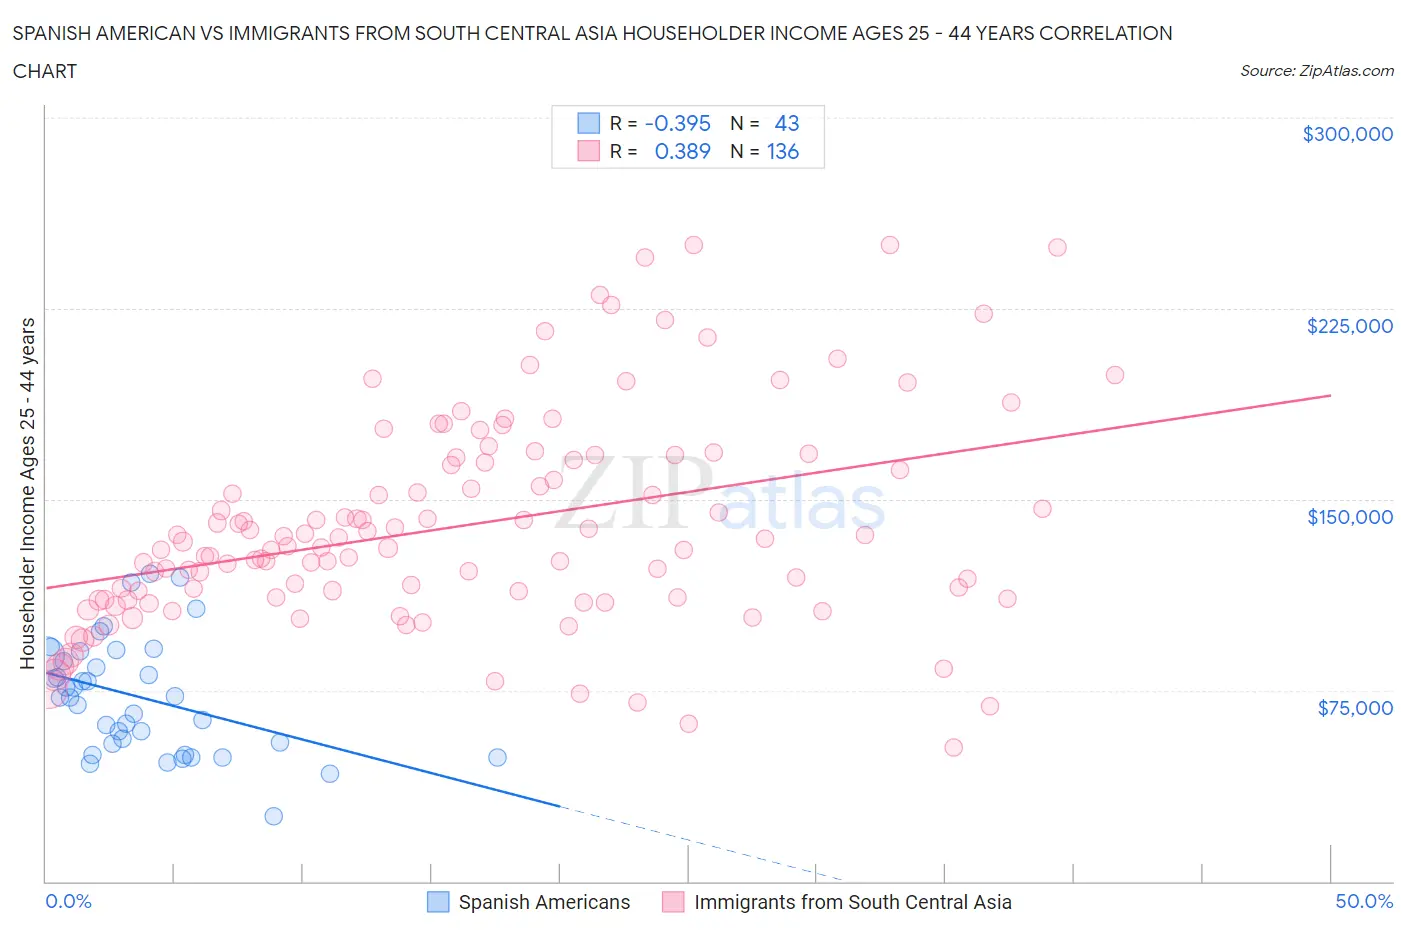 Spanish American vs Immigrants from South Central Asia Householder Income Ages 25 - 44 years